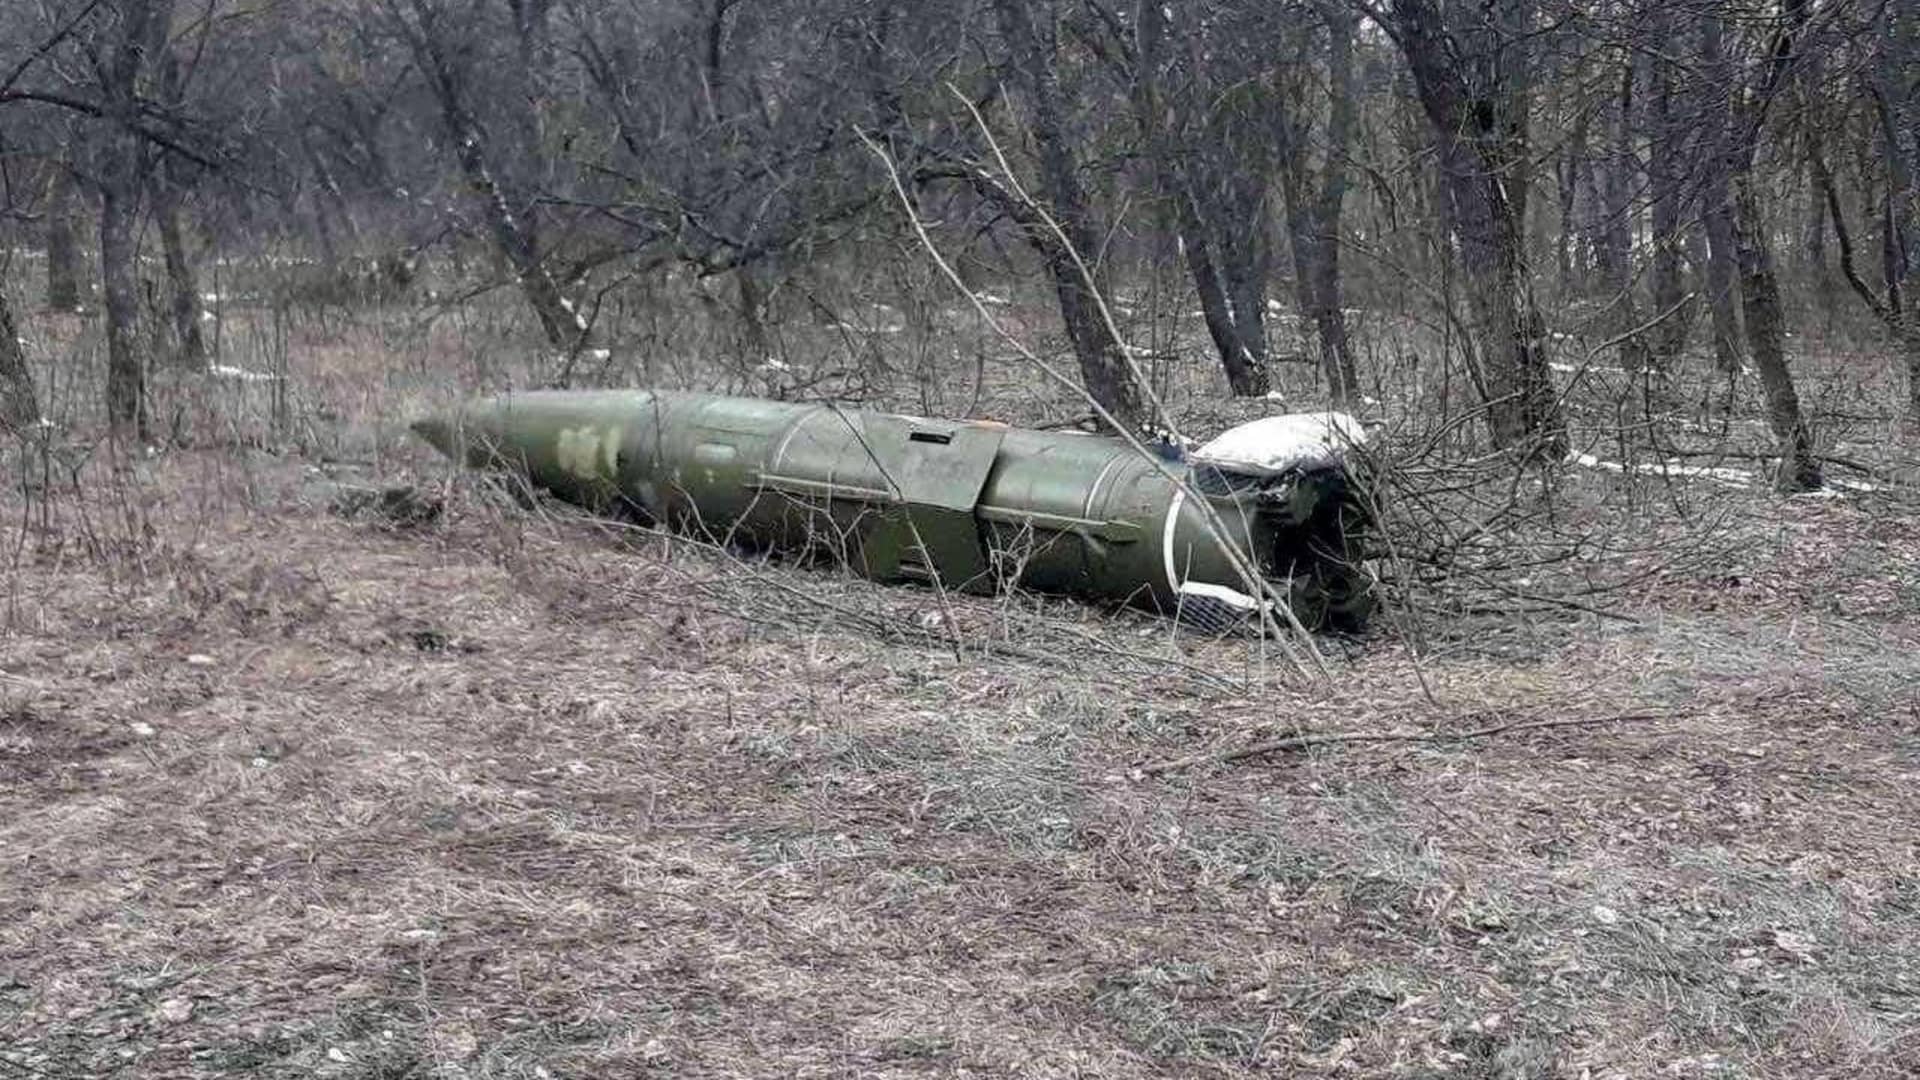 An unexploded short range hypersonic ballistic missile, according to Ukrainian authorities, from Iskander complex is seen amid Ukraine-Russia conflict in Kramatorsk, Ukraine, in this handout picture released March 9, 2022.